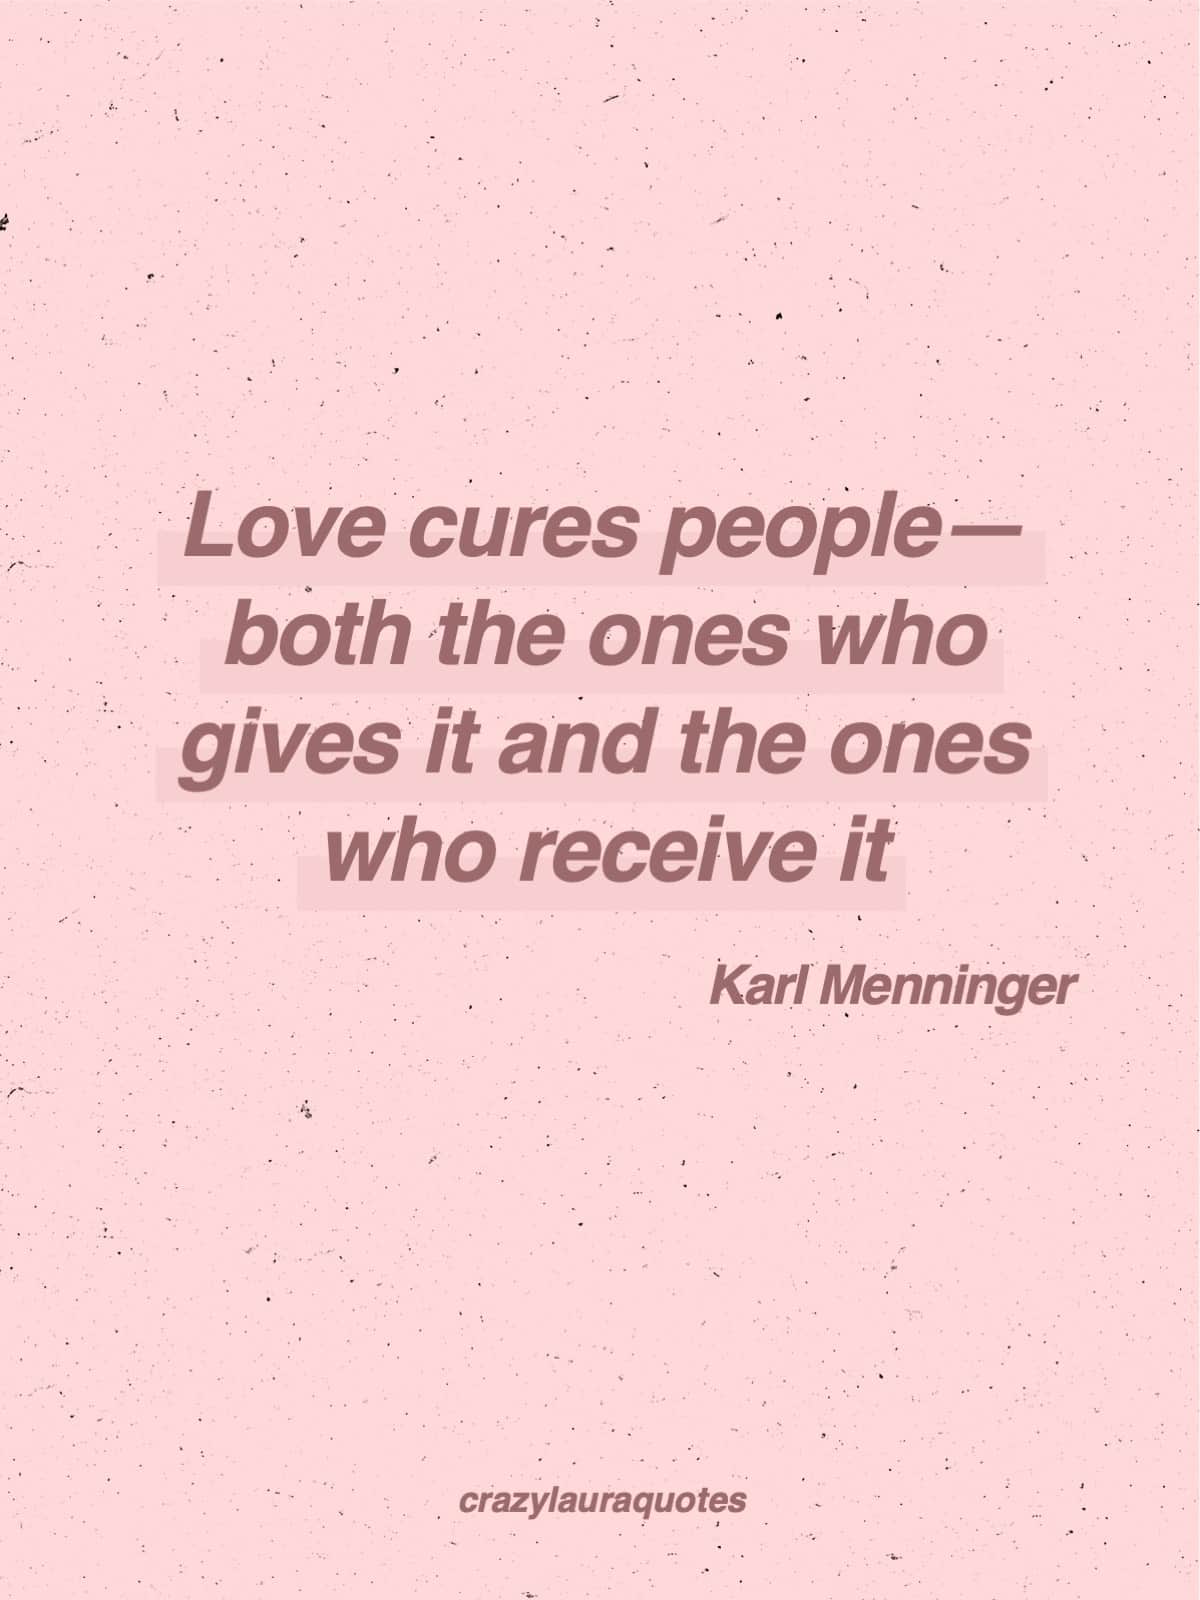 love can cure people karl menninger quote